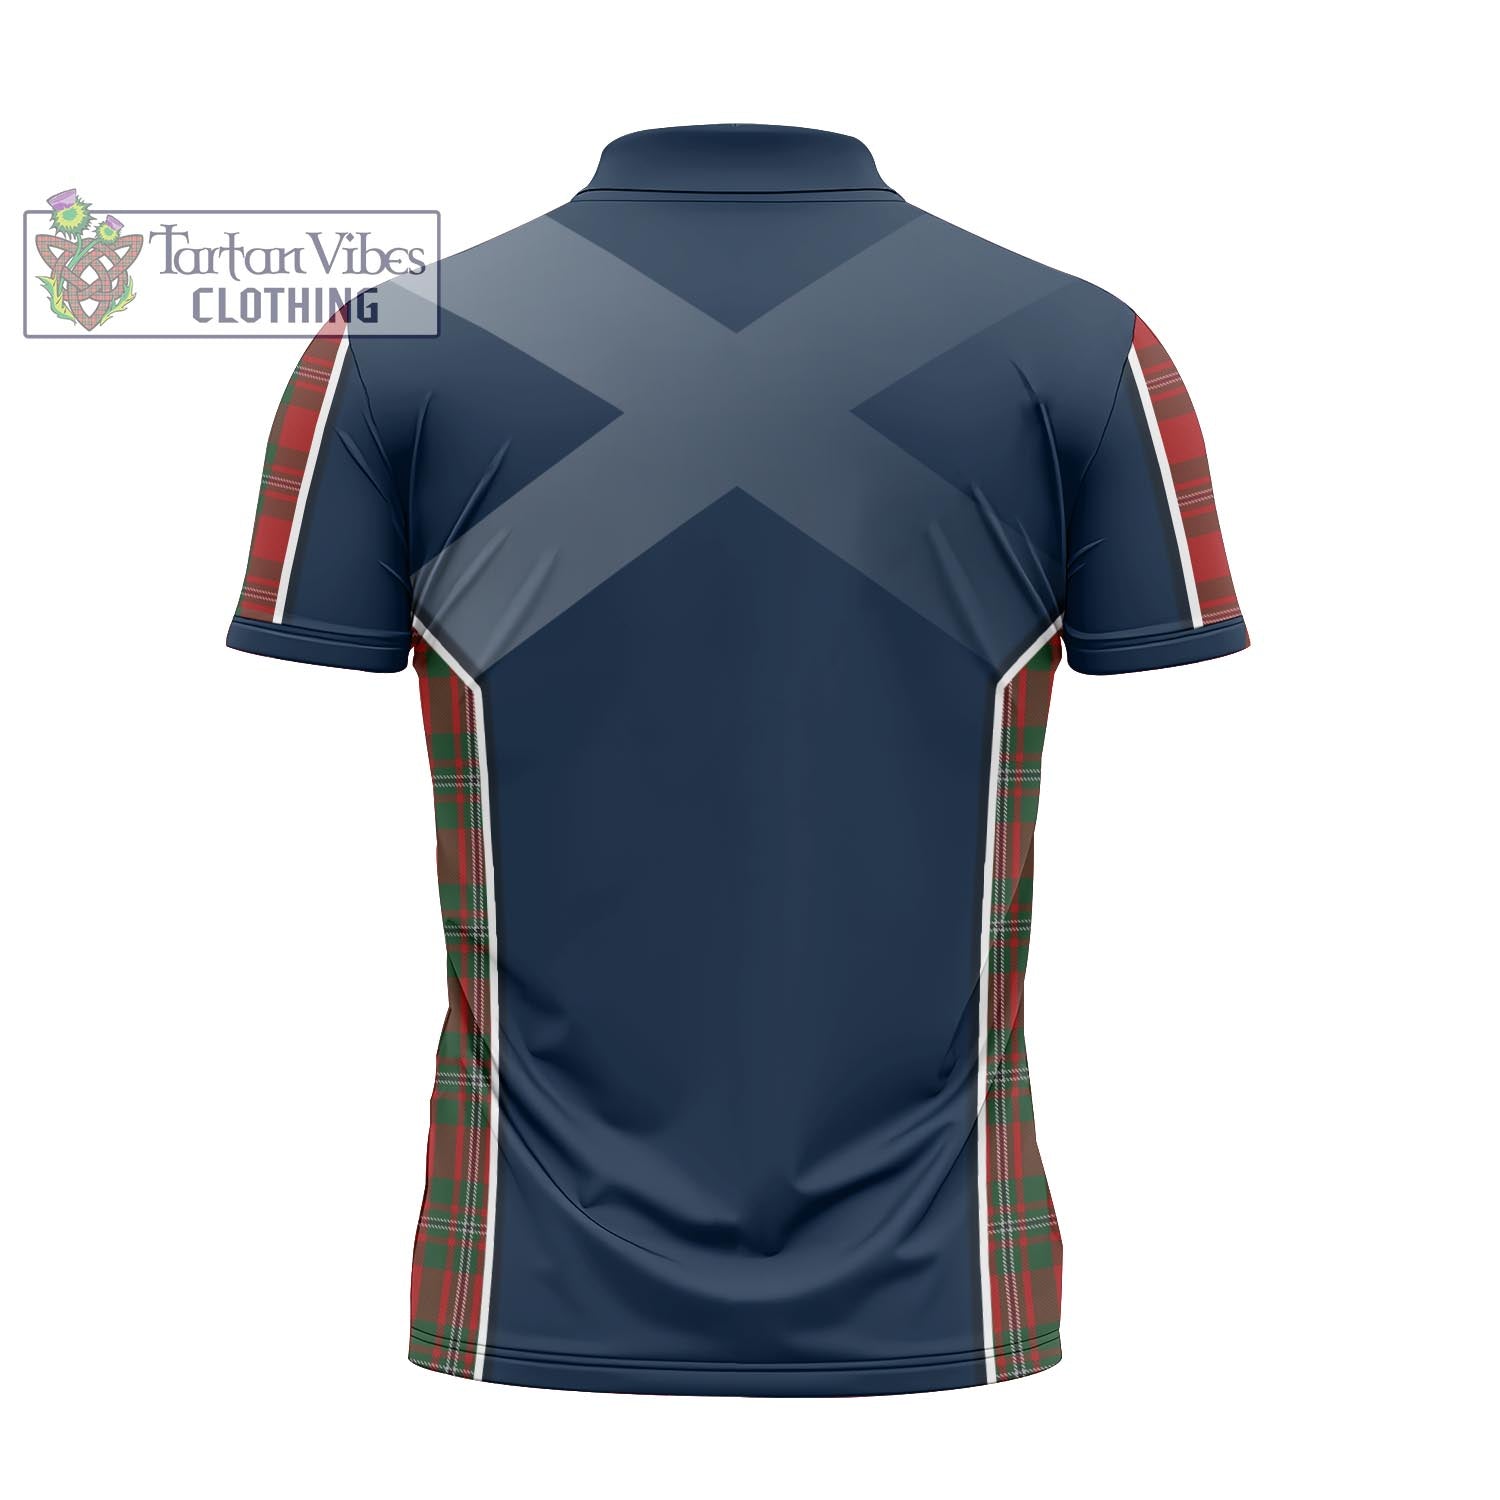 Tartan Vibes Clothing MacGregor Tartan Zipper Polo Shirt with Family Crest and Lion Rampant Vibes Sport Style